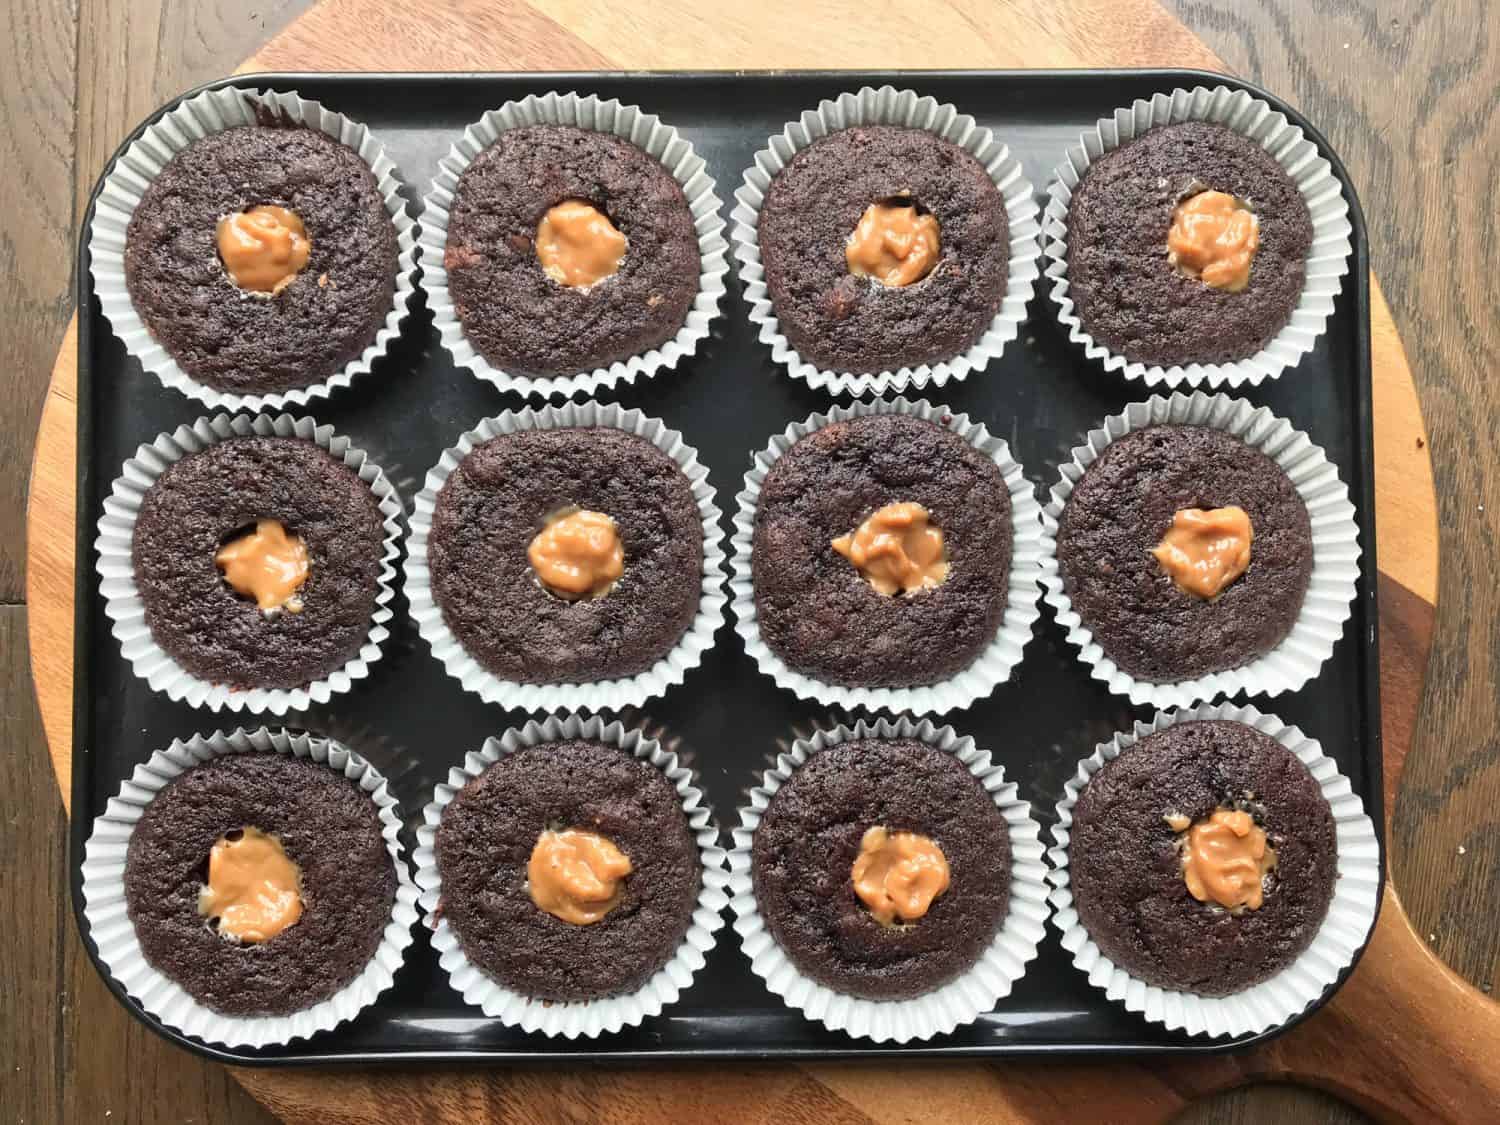 A tray of 12 chocolate cupcakes with holes in the centre. Each hole has been filled with caramel sauce.